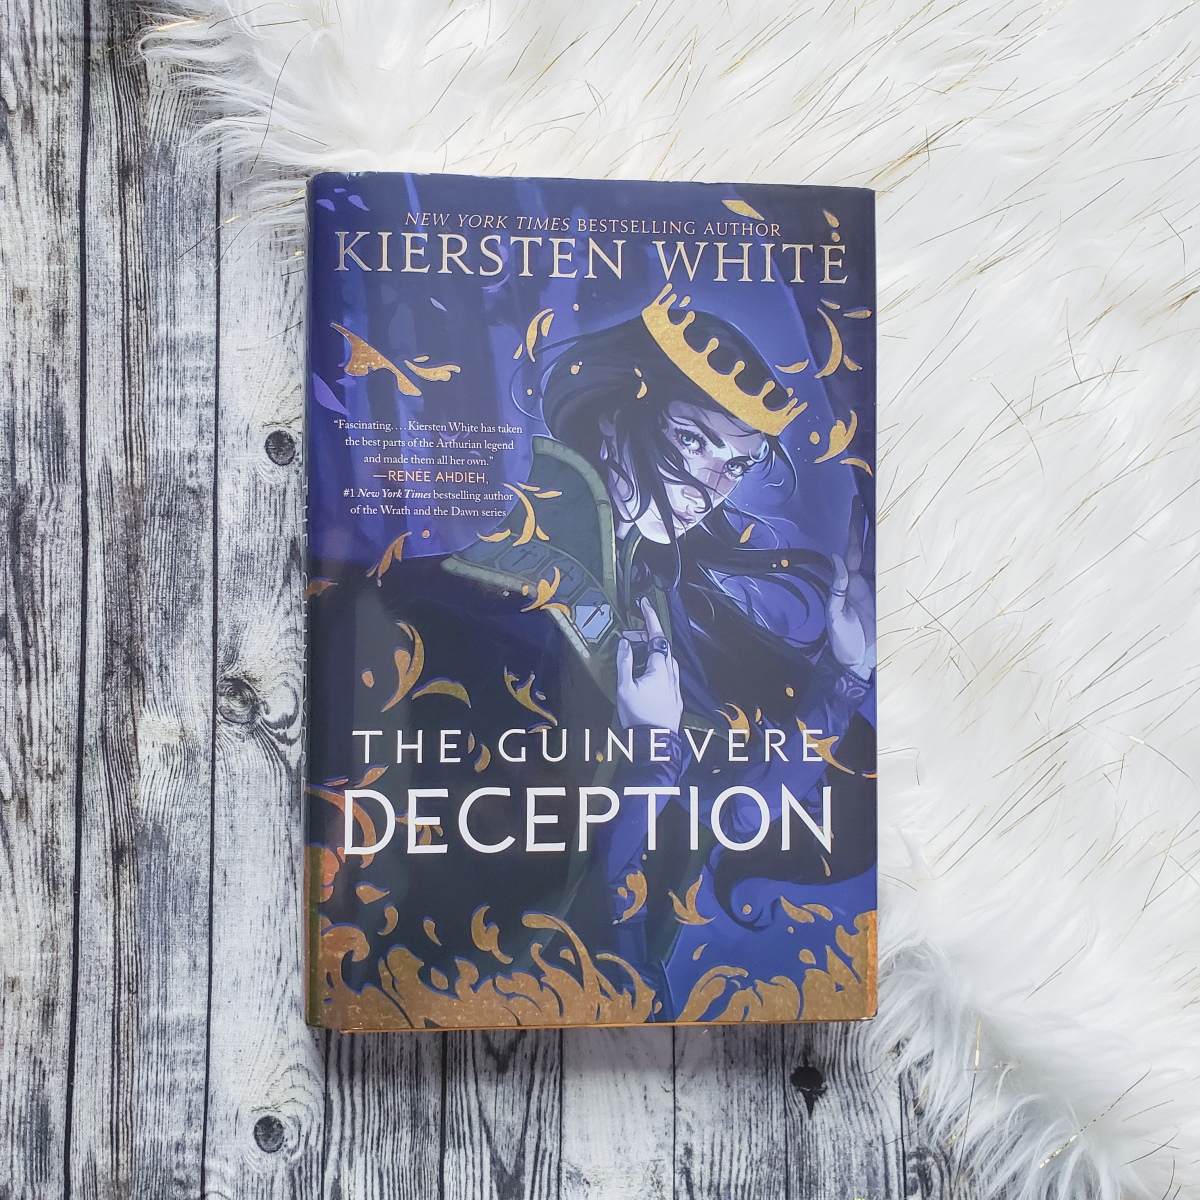 The Guinevere Deception (Camelot Rising #1) by Kiersten White